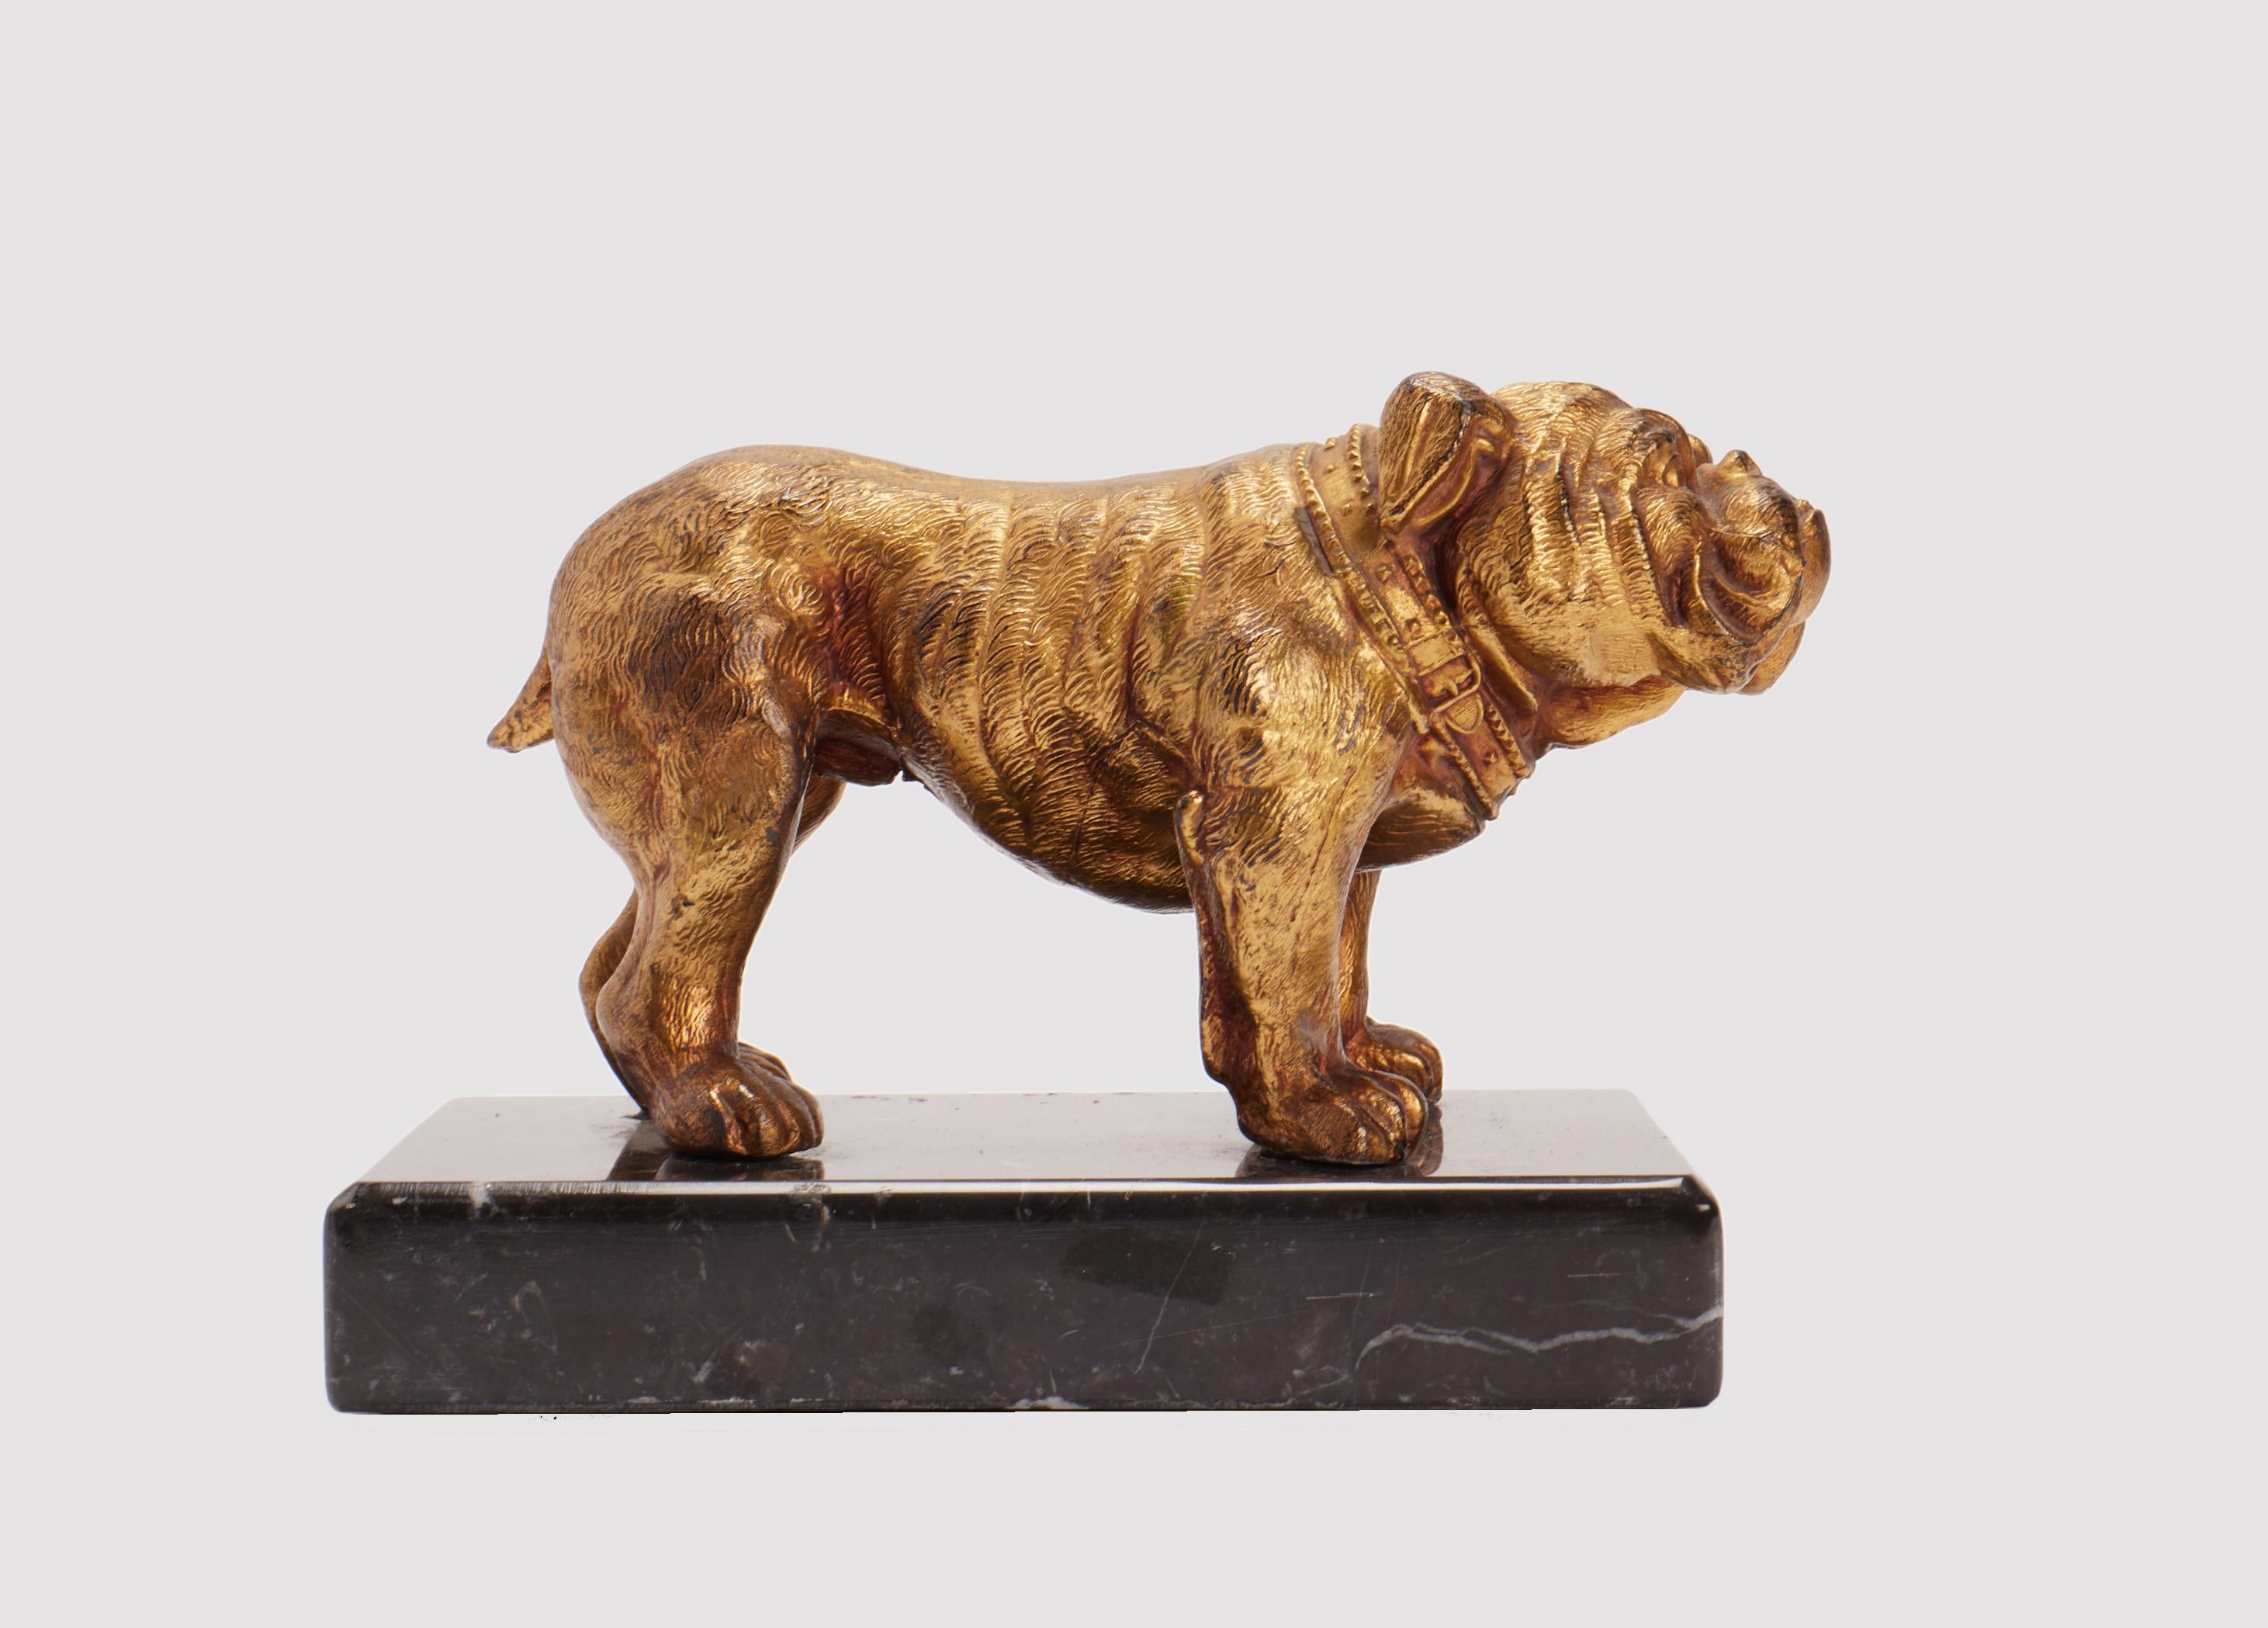 Golden antimony metal sculpture, depicting an English Bulldog dog, mounted on a veined black marble base. Signed J. B. America circa 1890.